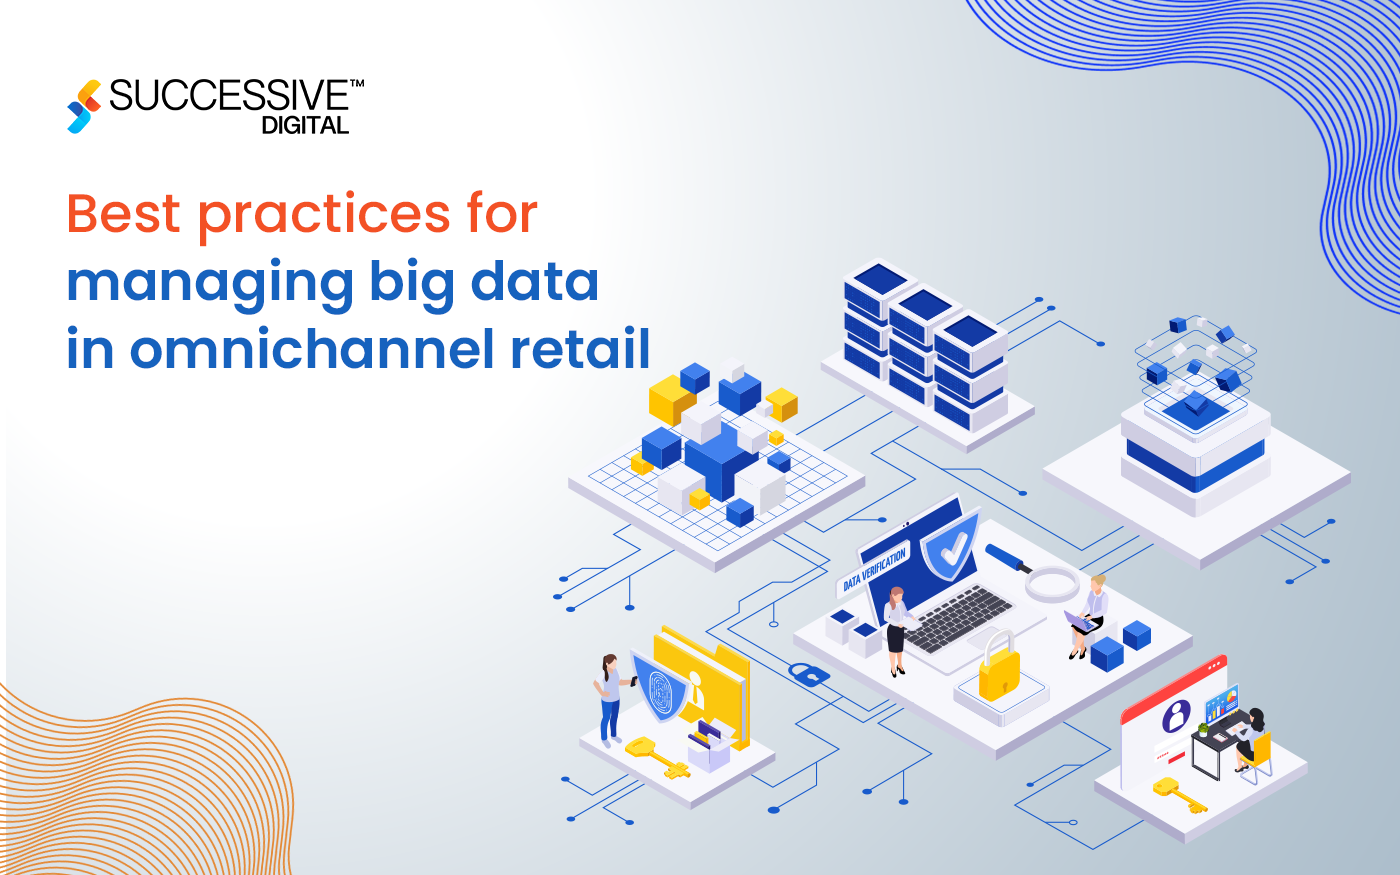 What are the Best Practices for Managing Big Data in Omnichannel Retail?